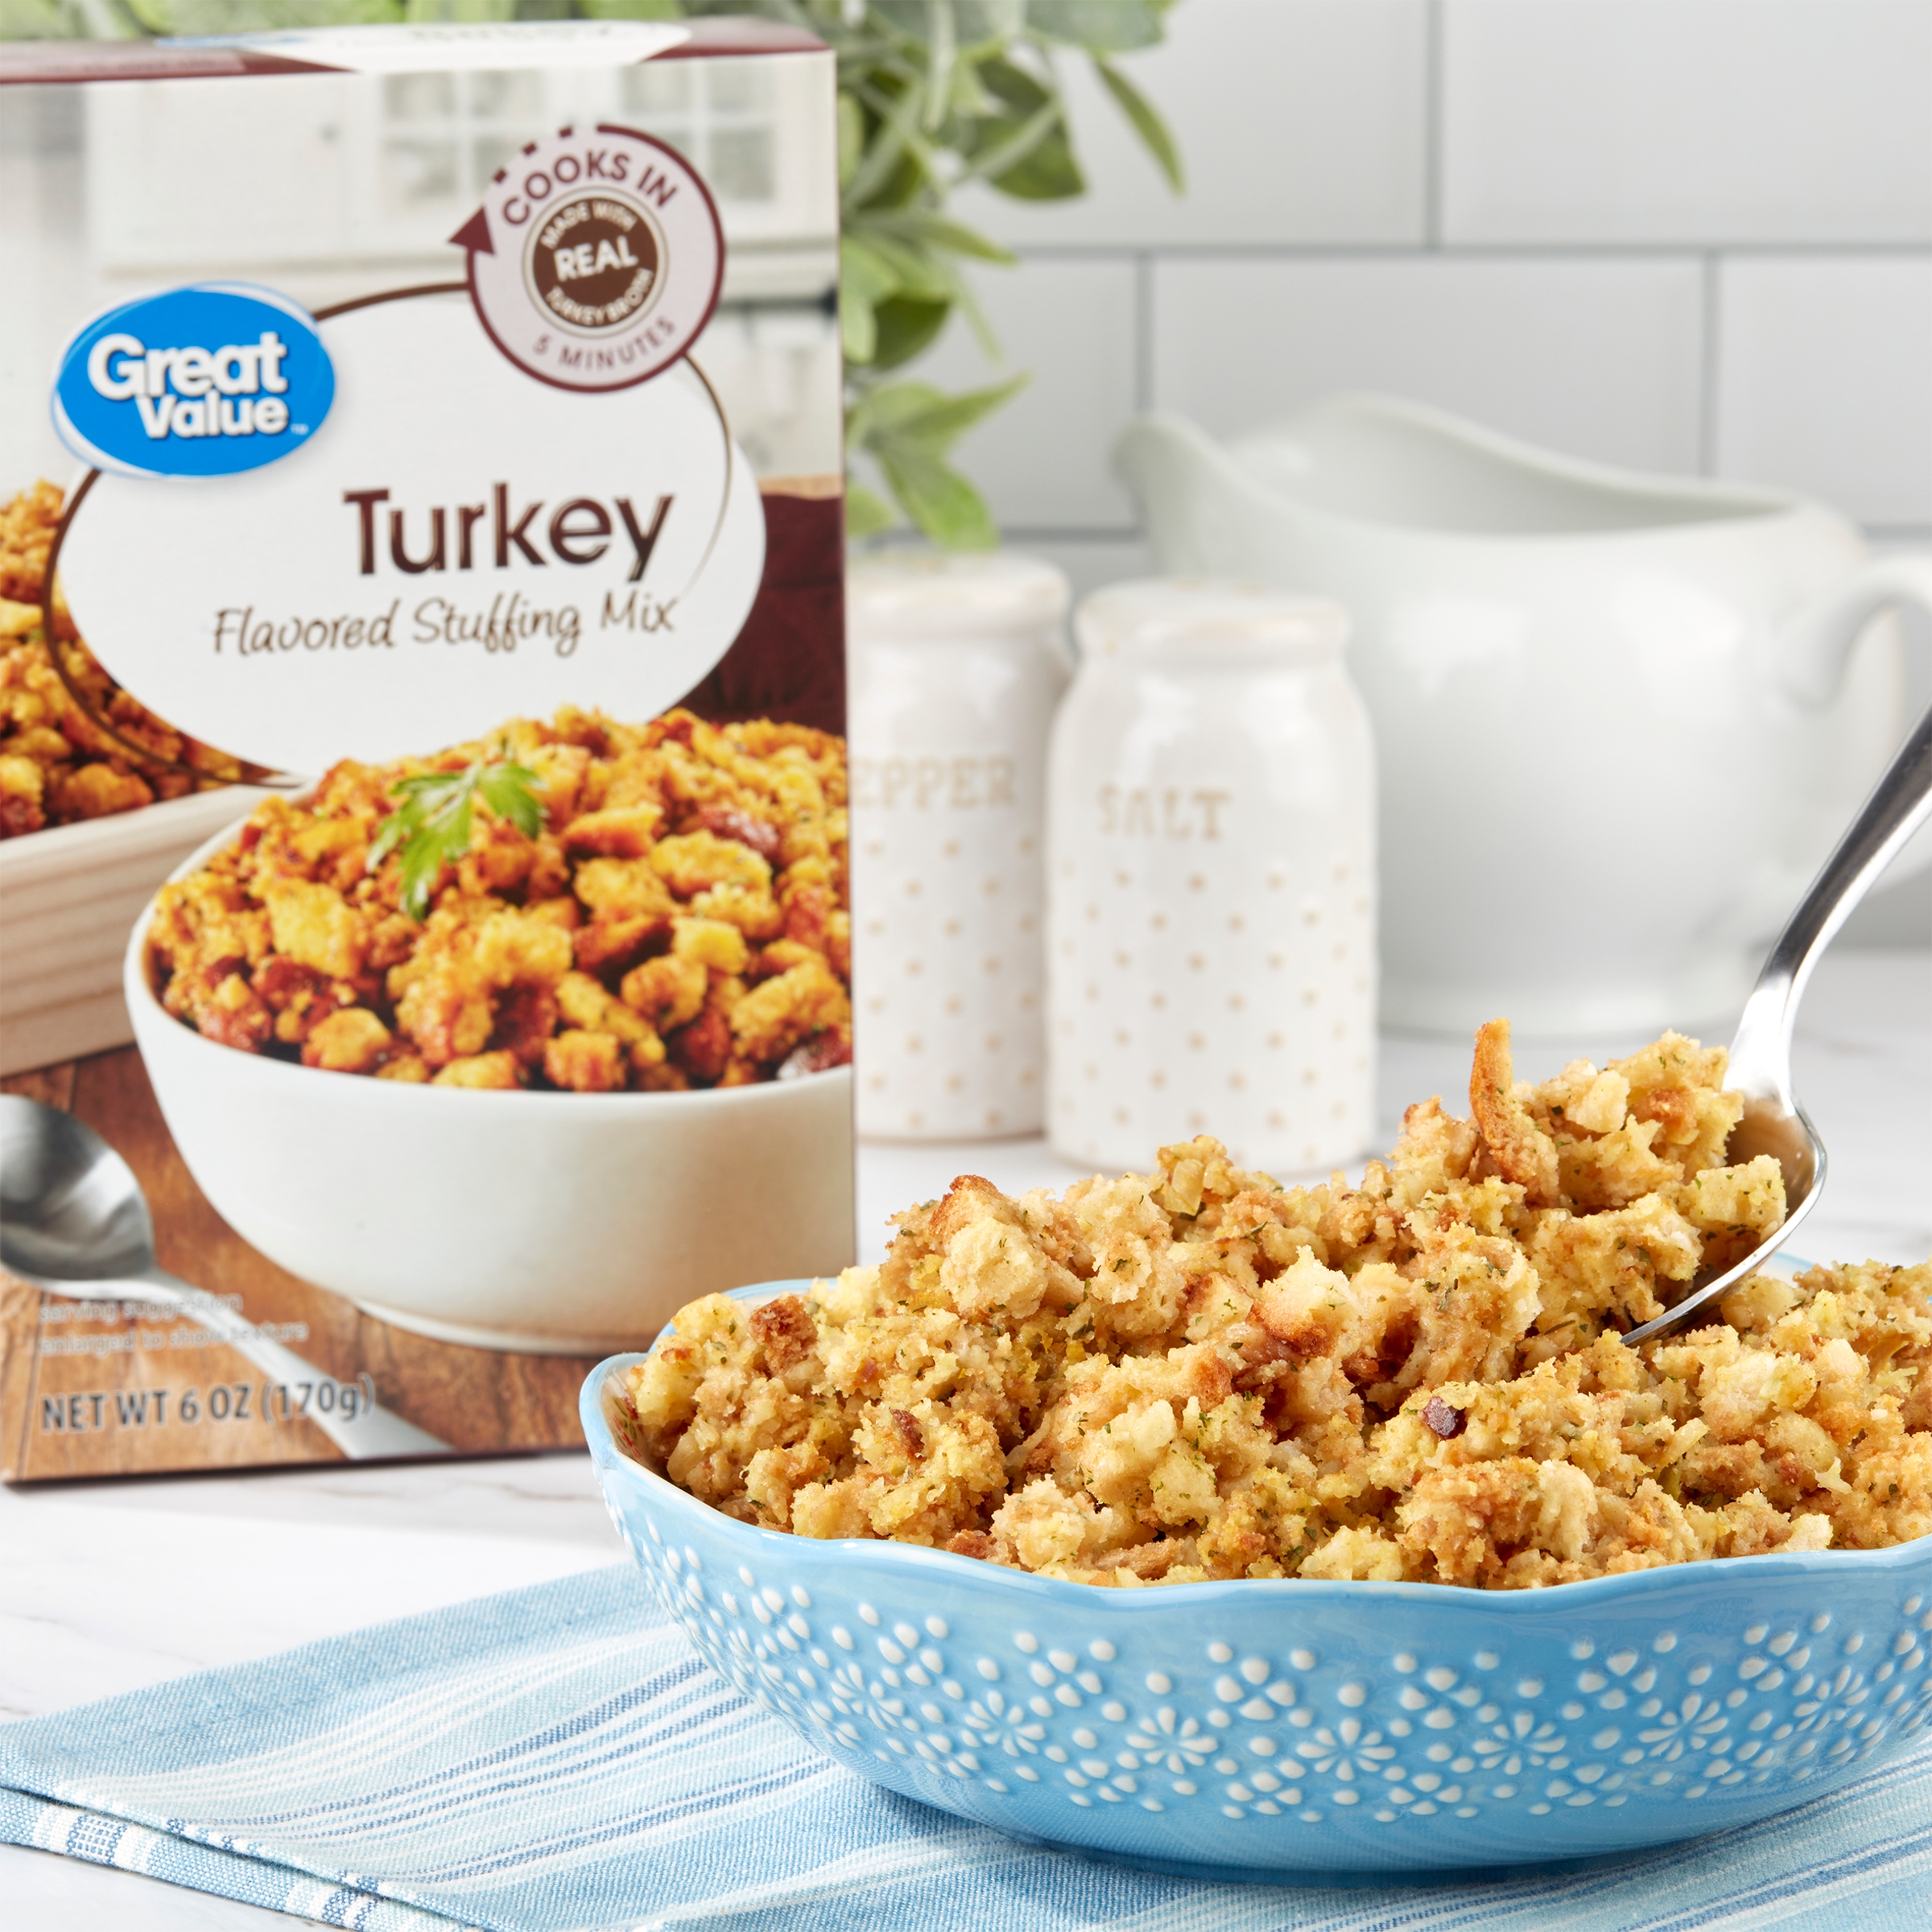 Great Value Turkey Flavored Stuffing Mix, 6 oz - image 2 of 9